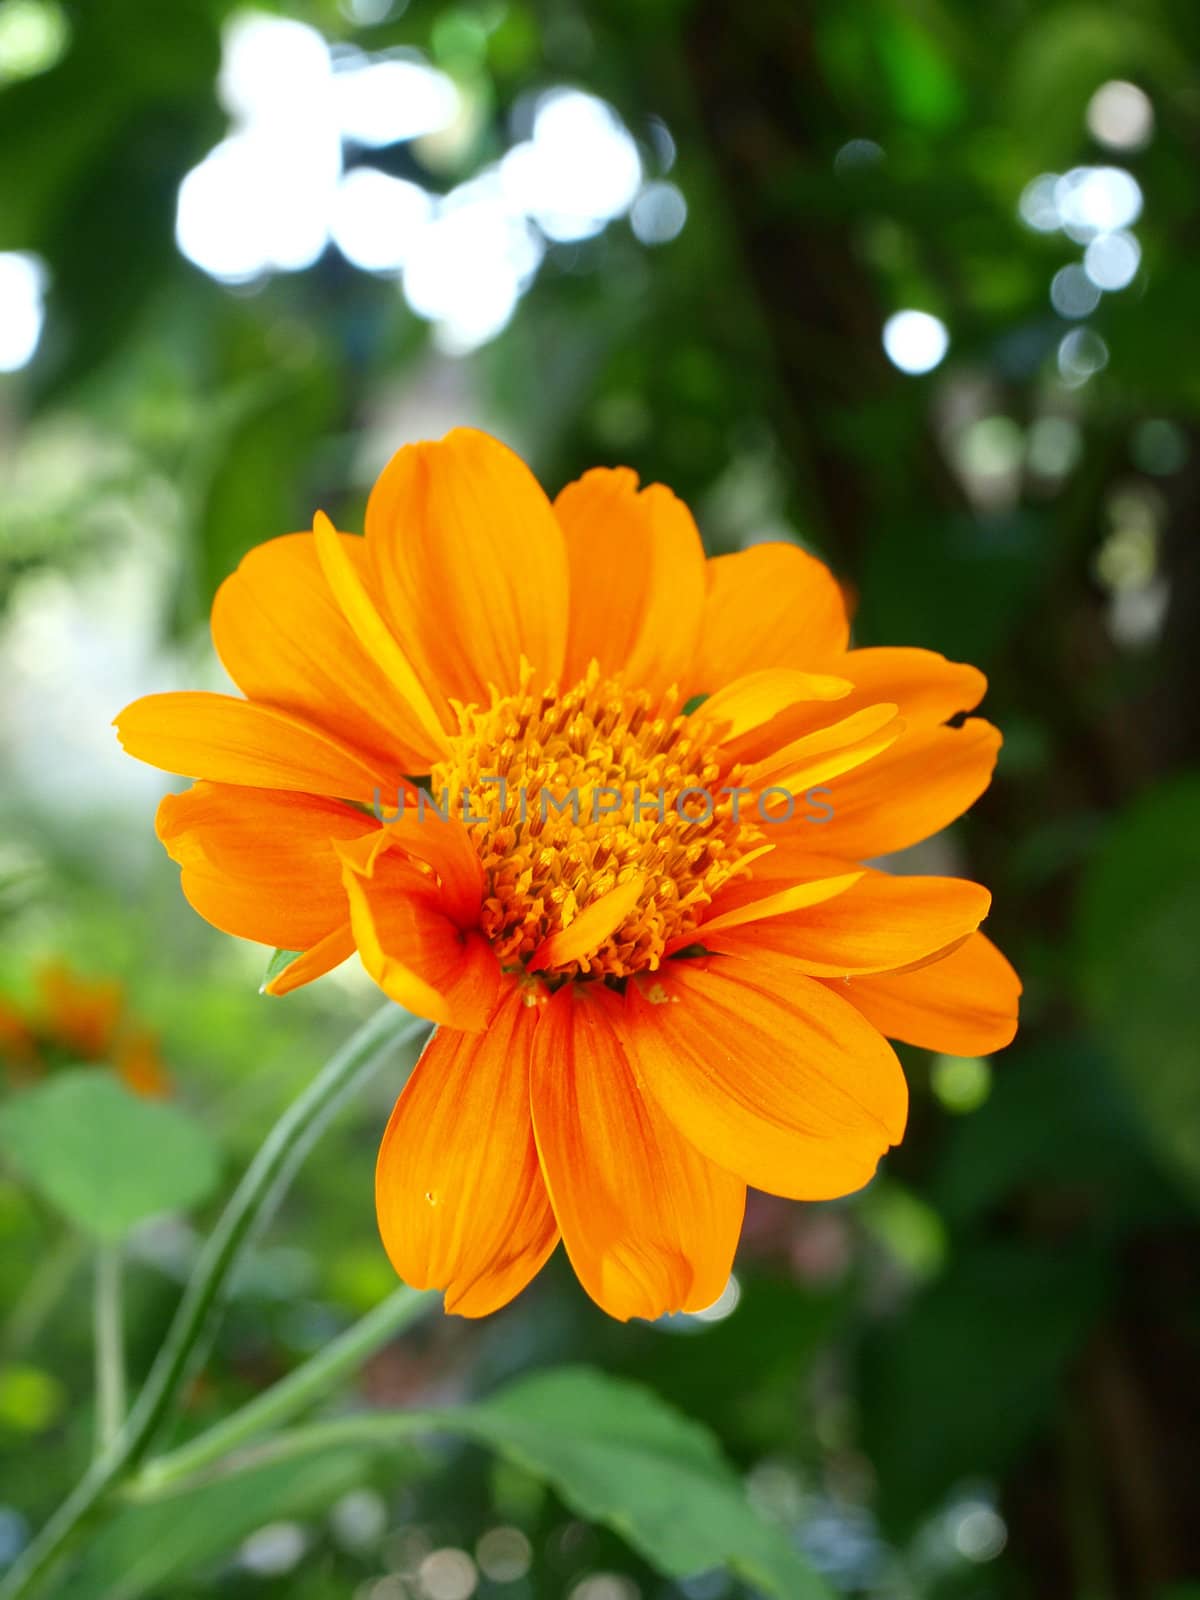 A close up of a Mexican Sunflower by jakgree